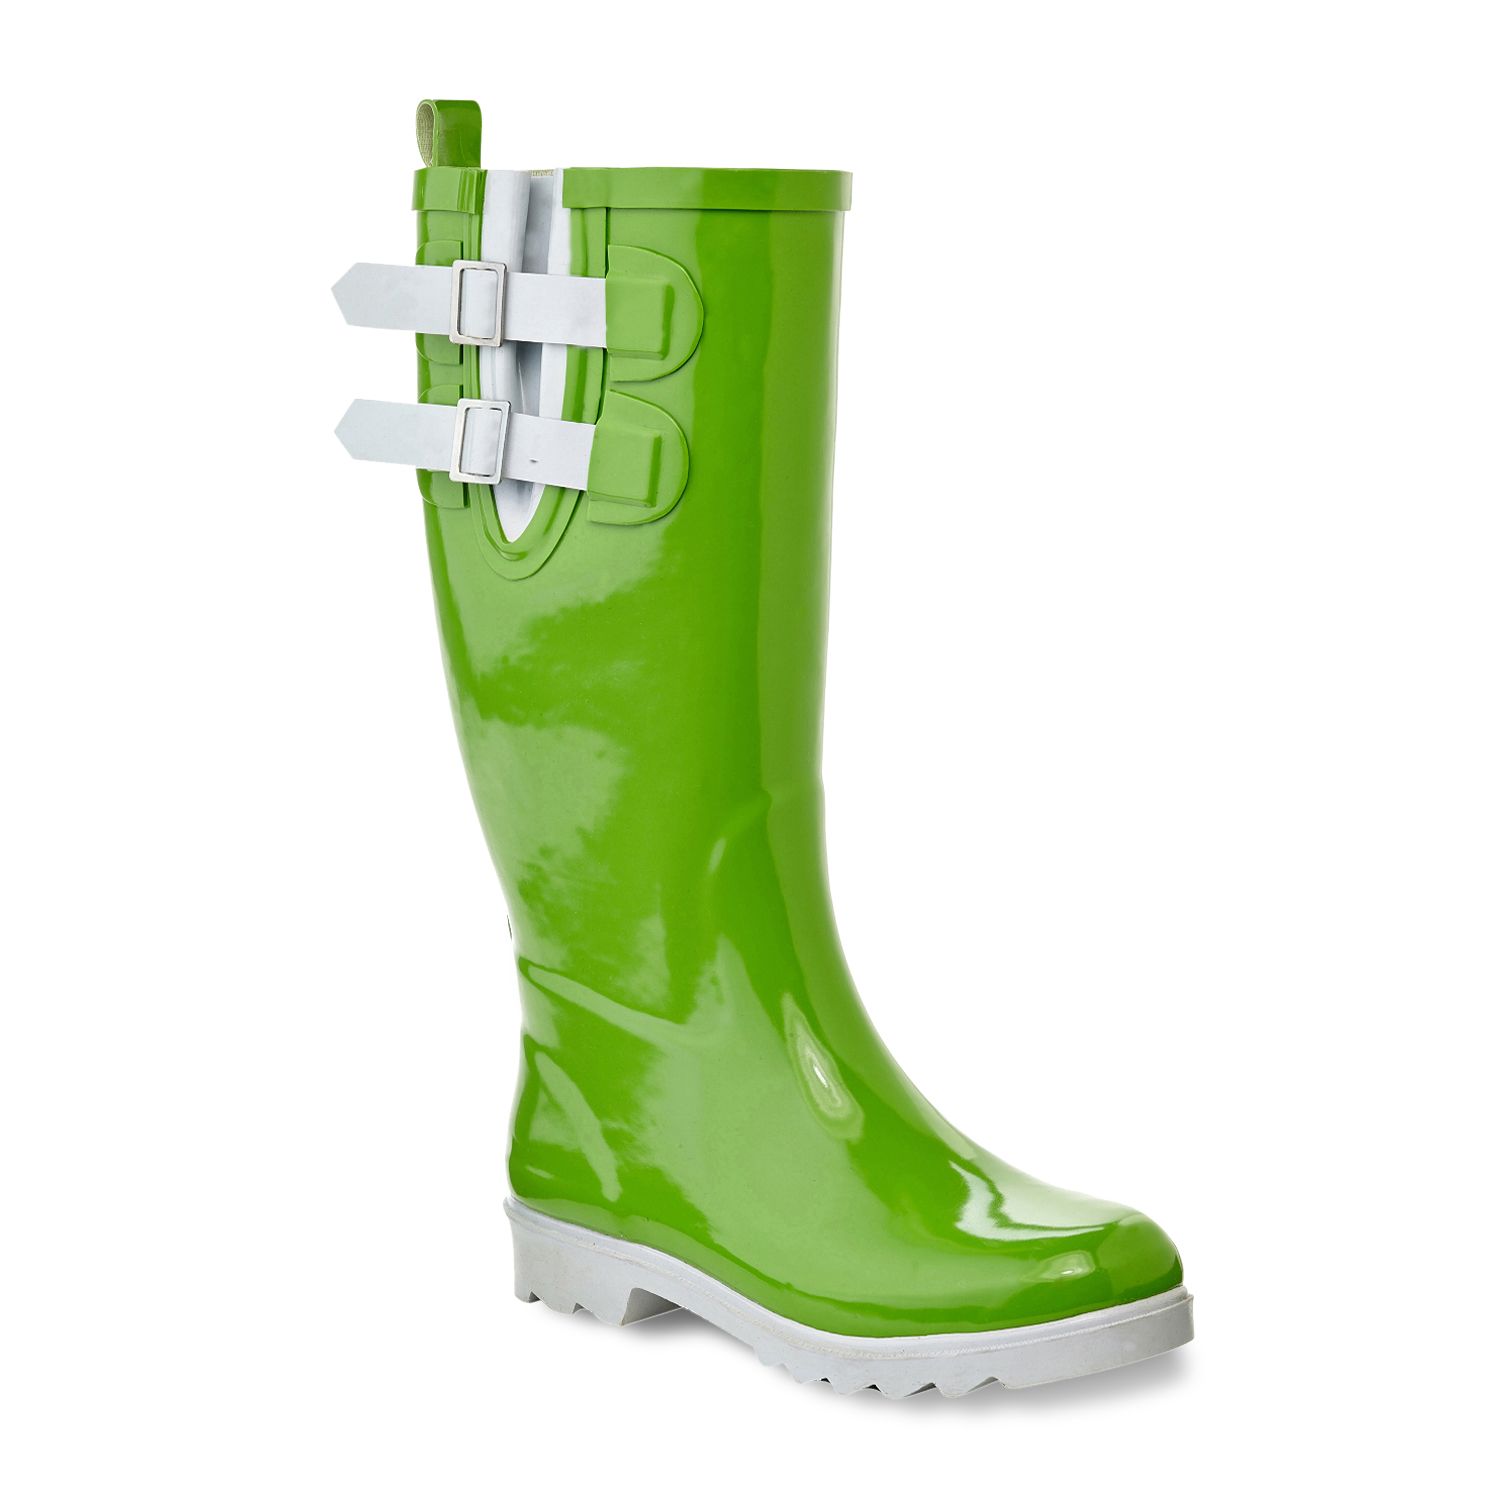 Image for Henry Ferrera Black Stone Women's Water-Resistant Rain Boots at Kohl's.